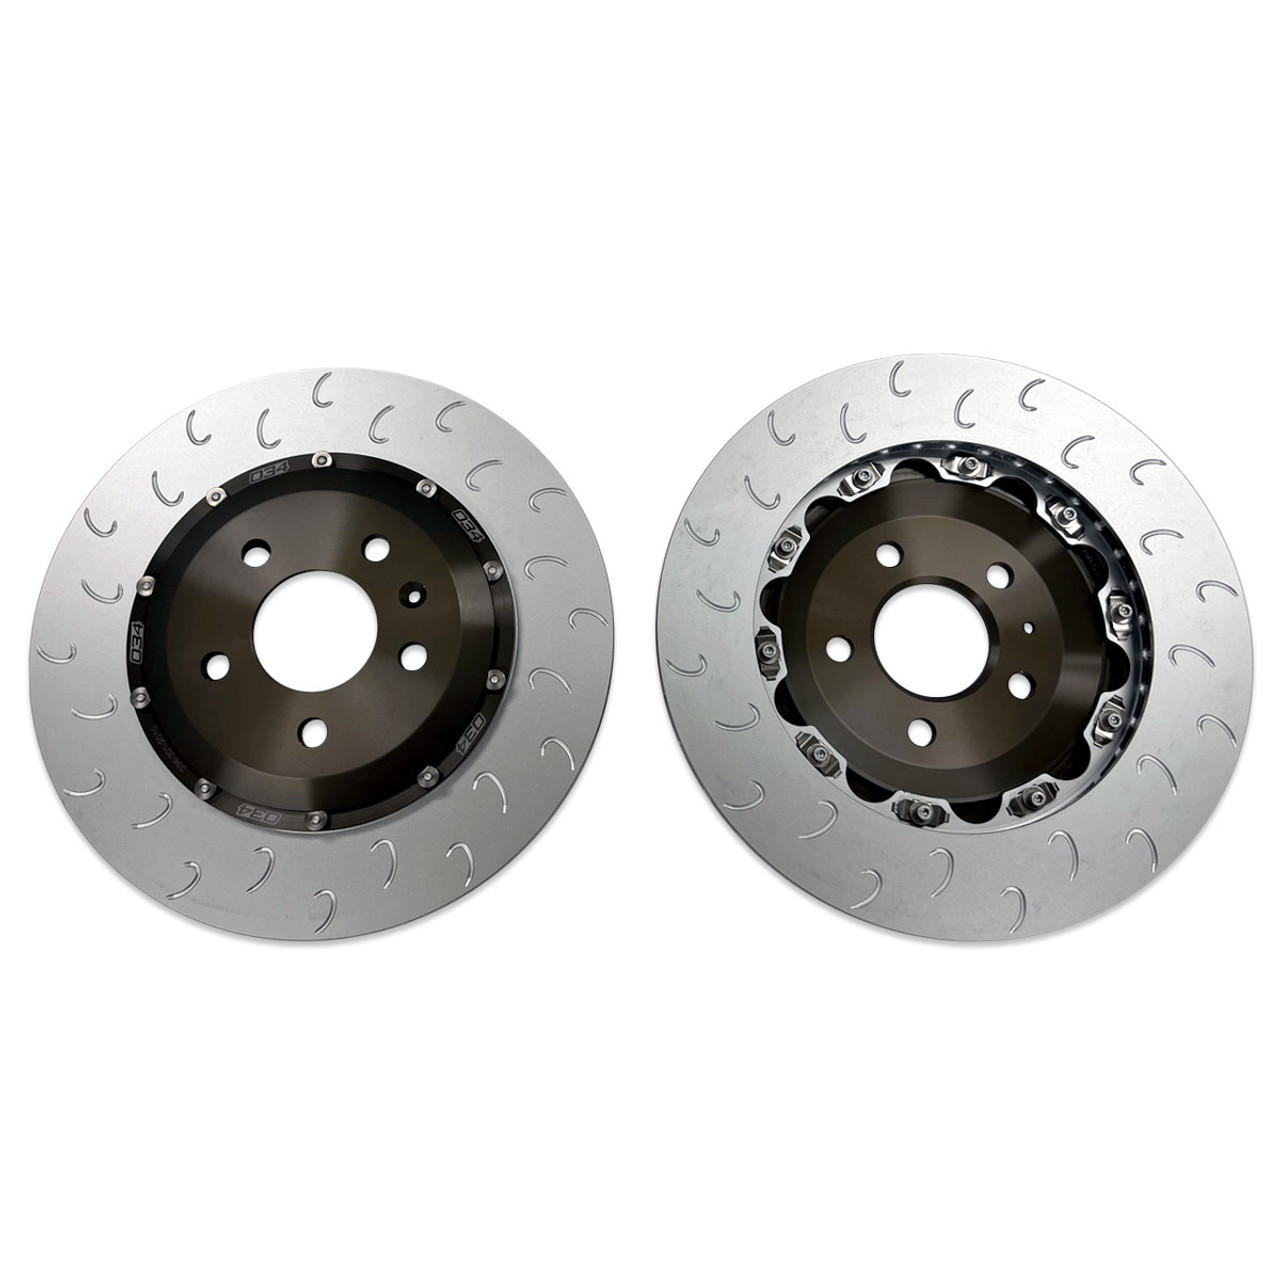 2-Piece Floating Rear Brake Rotor Upgrade Kit for Audi B9/B9.5 RS4/RS5